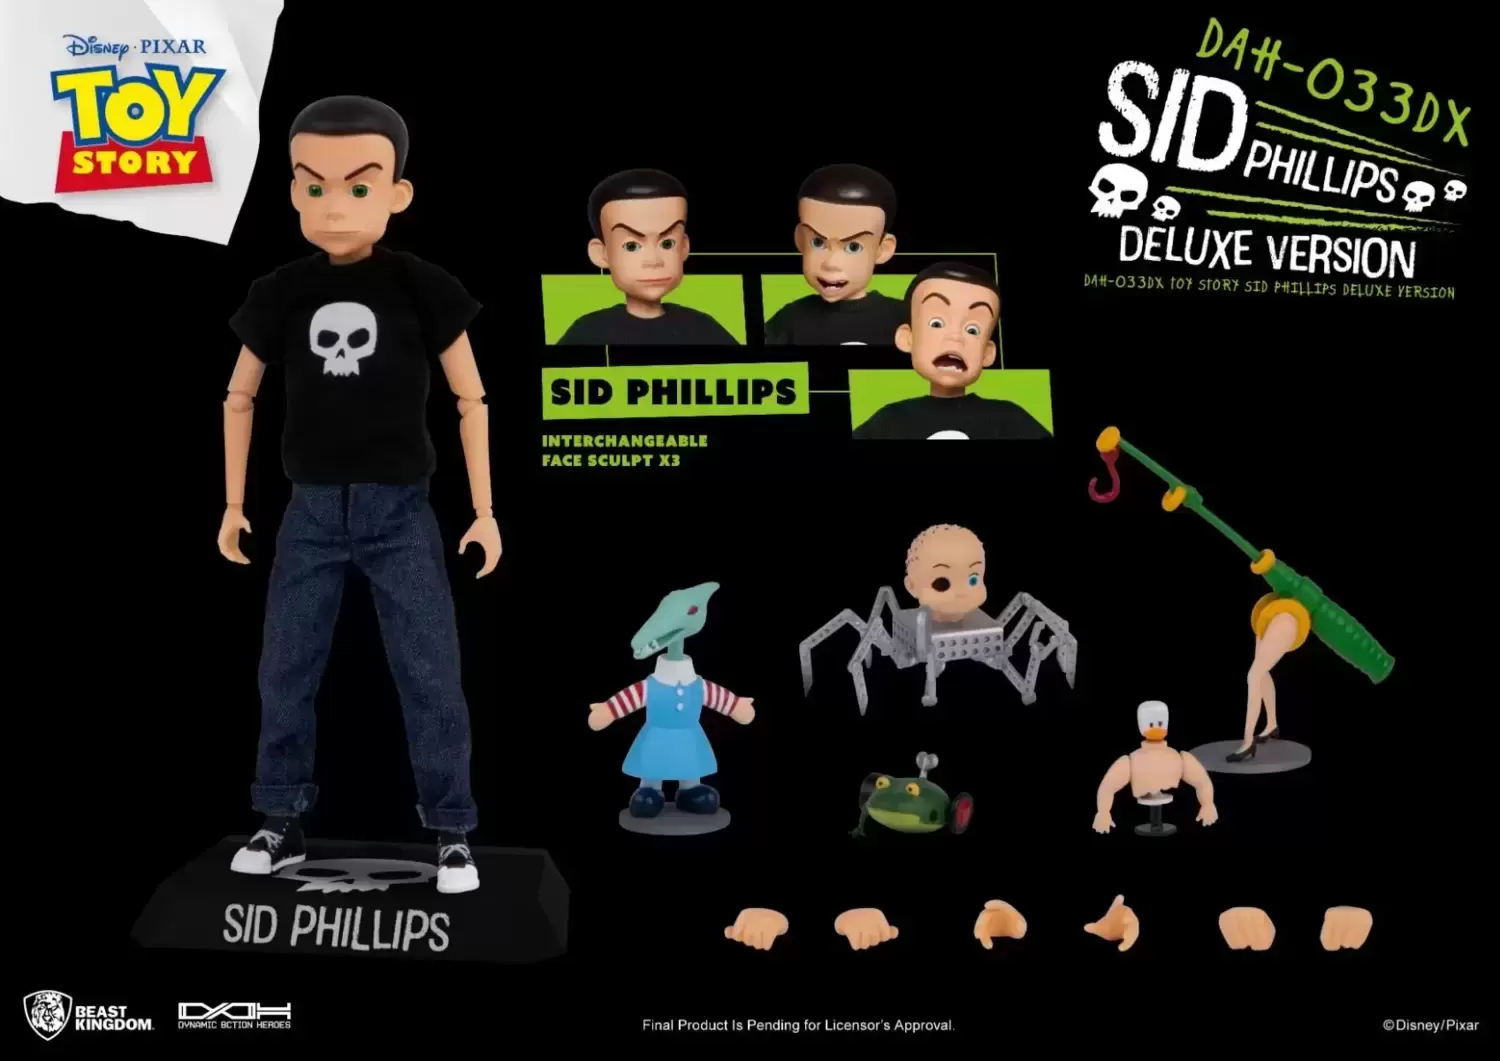 Dynamic 8ction Heroes (DAH) - Toy Story - Sid Phillips (Deluxe Version)